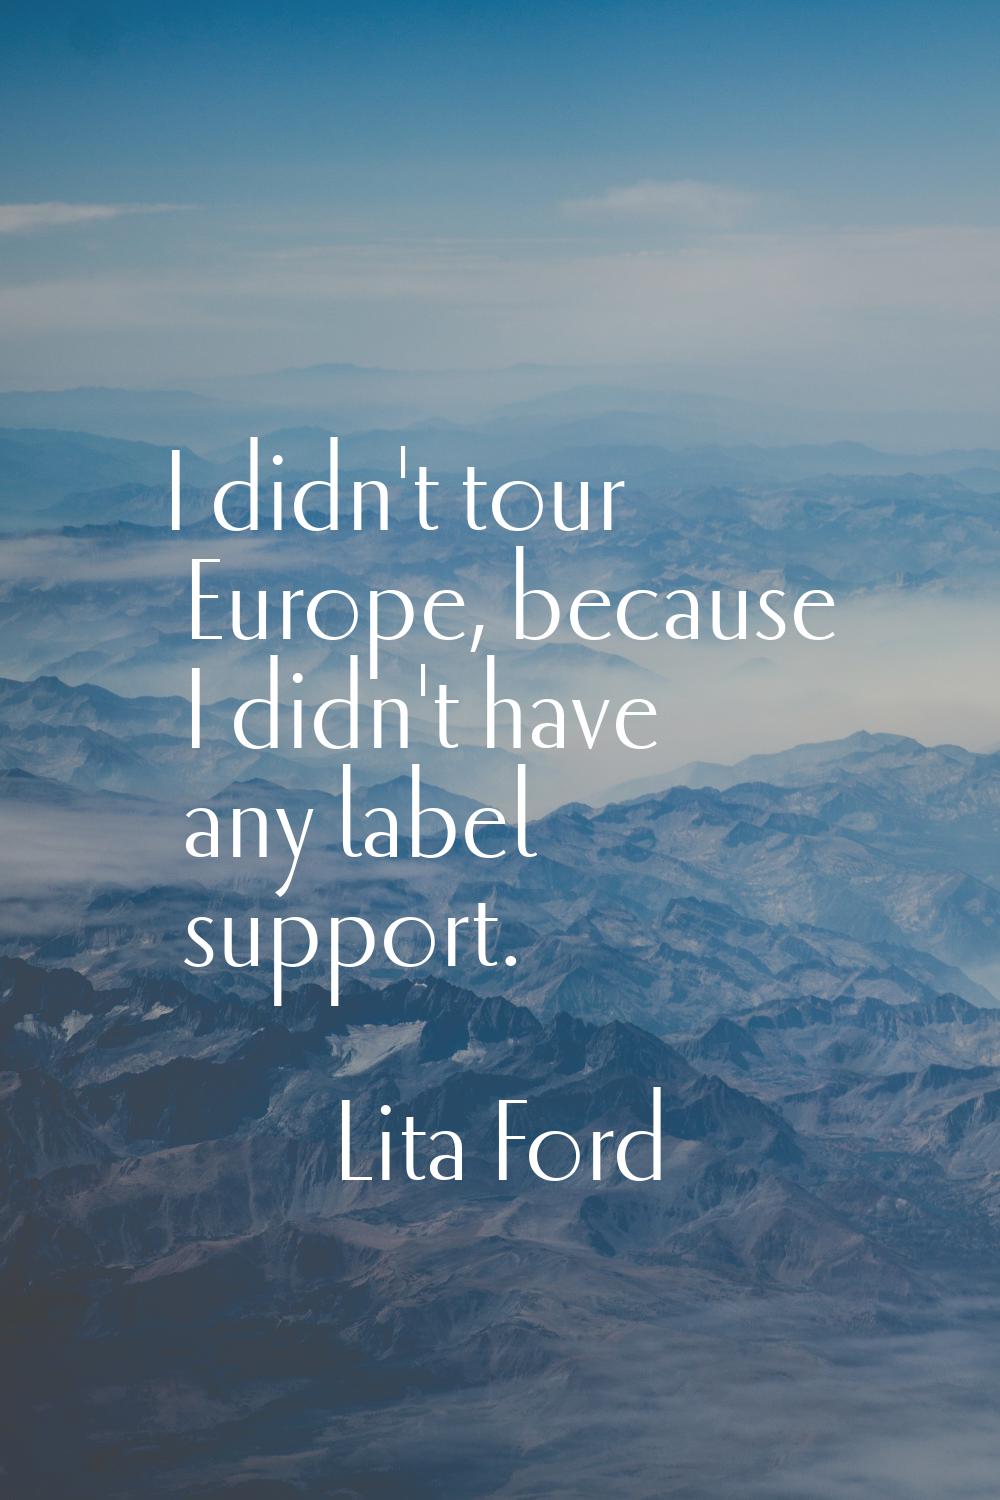 I didn't tour Europe, because I didn't have any label support.